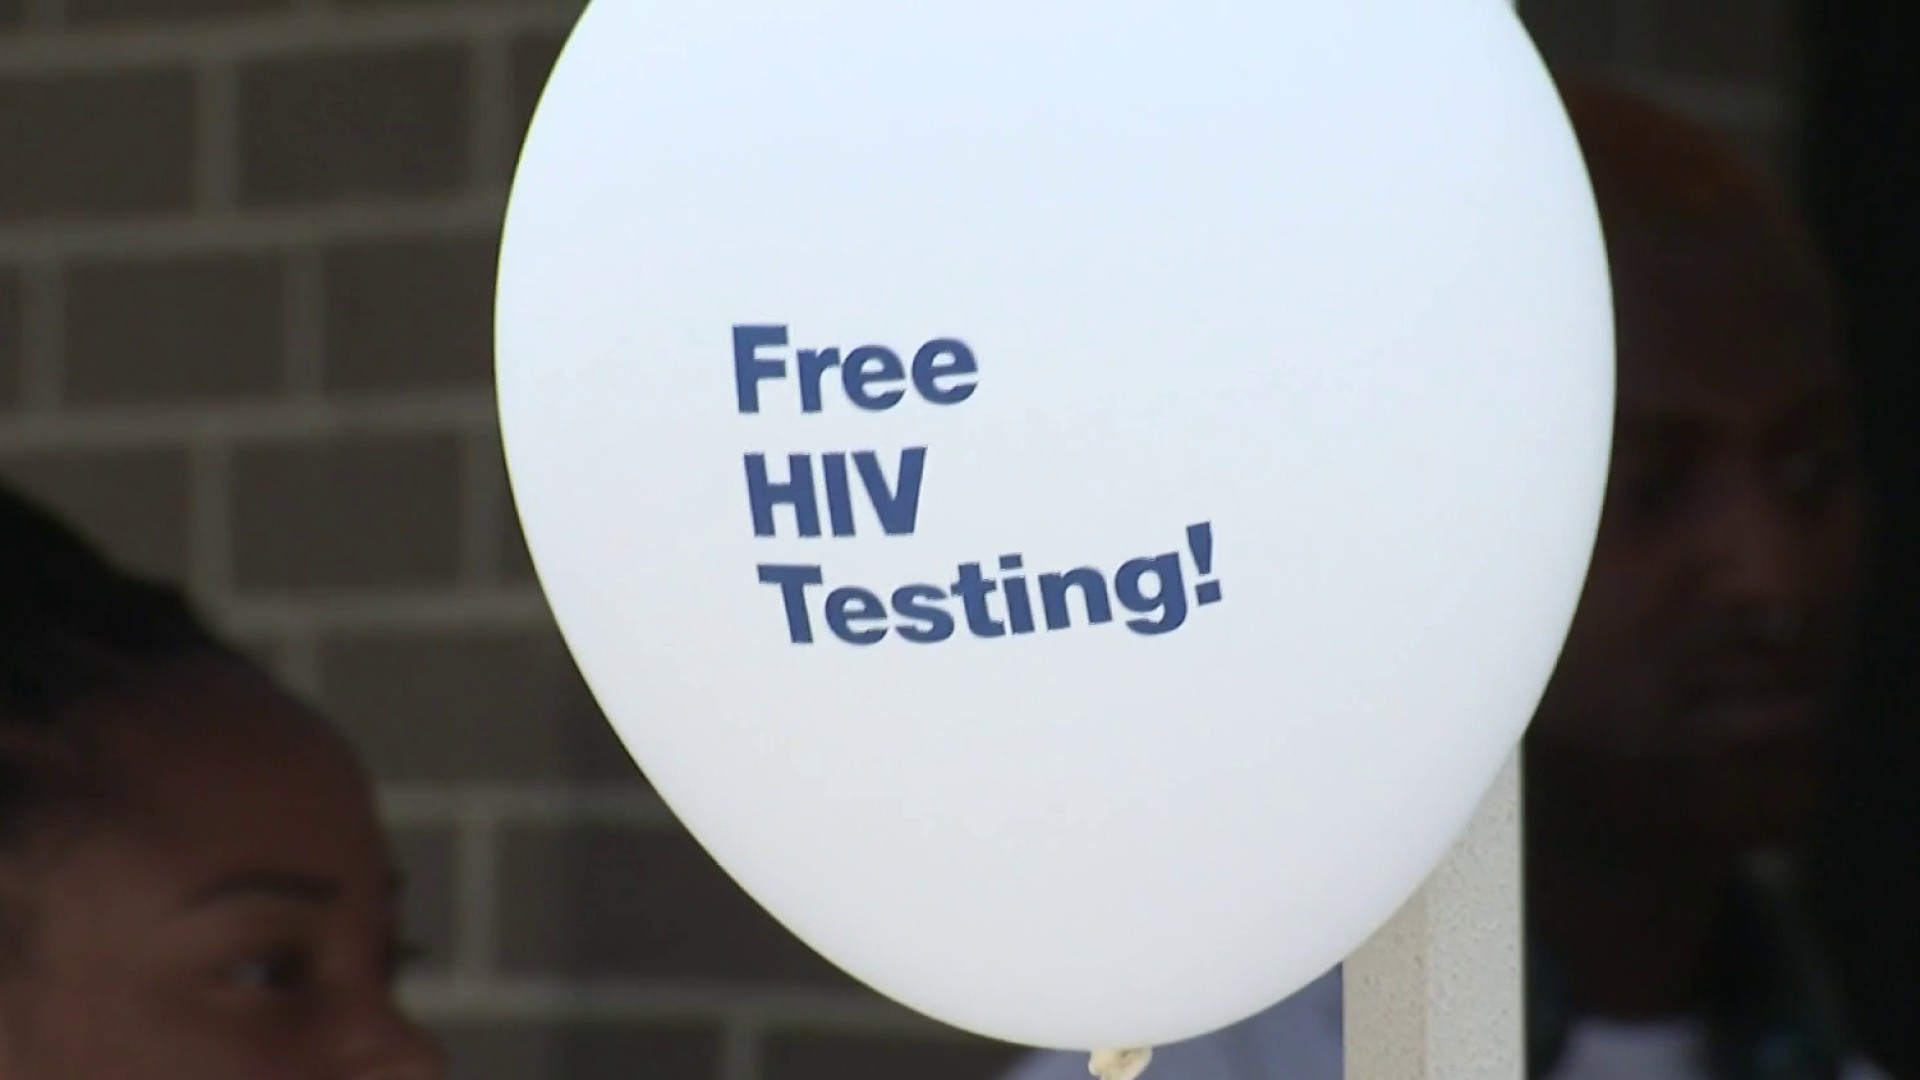 Jun 26, Free HIV Testing and Resources at New Walmart Specialty Pharmacy  of the Community in Orlando